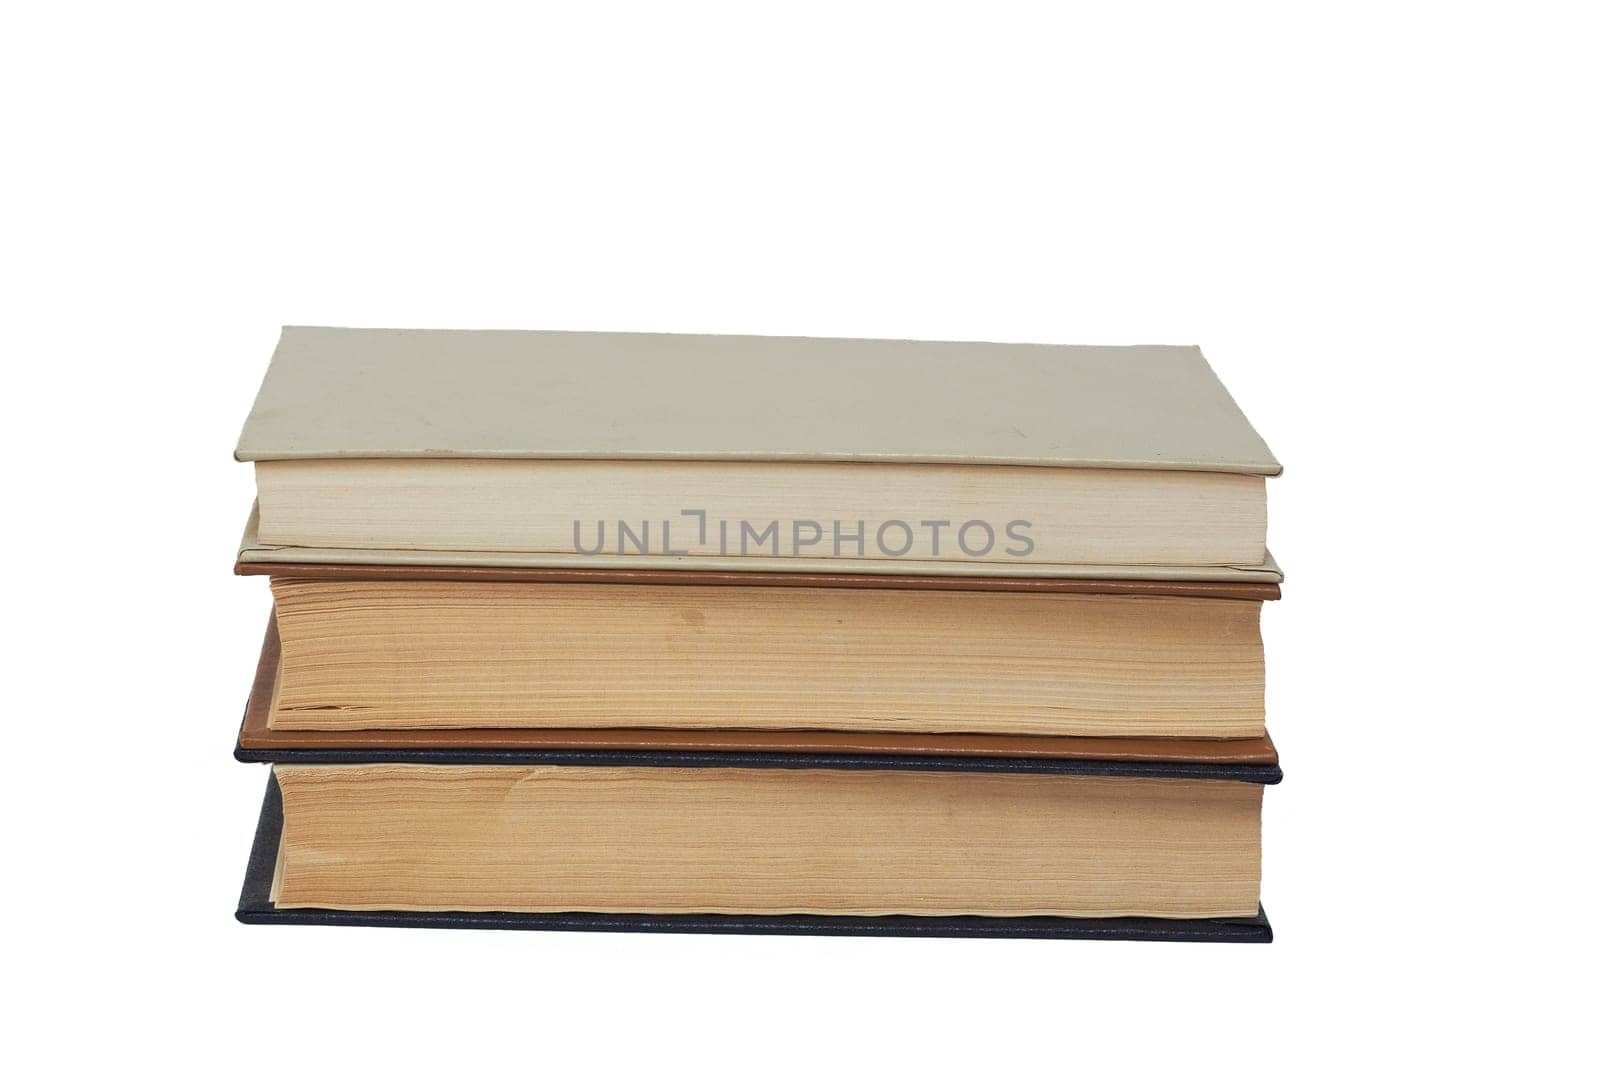 A stack of old hardcover books highlighted on a white background